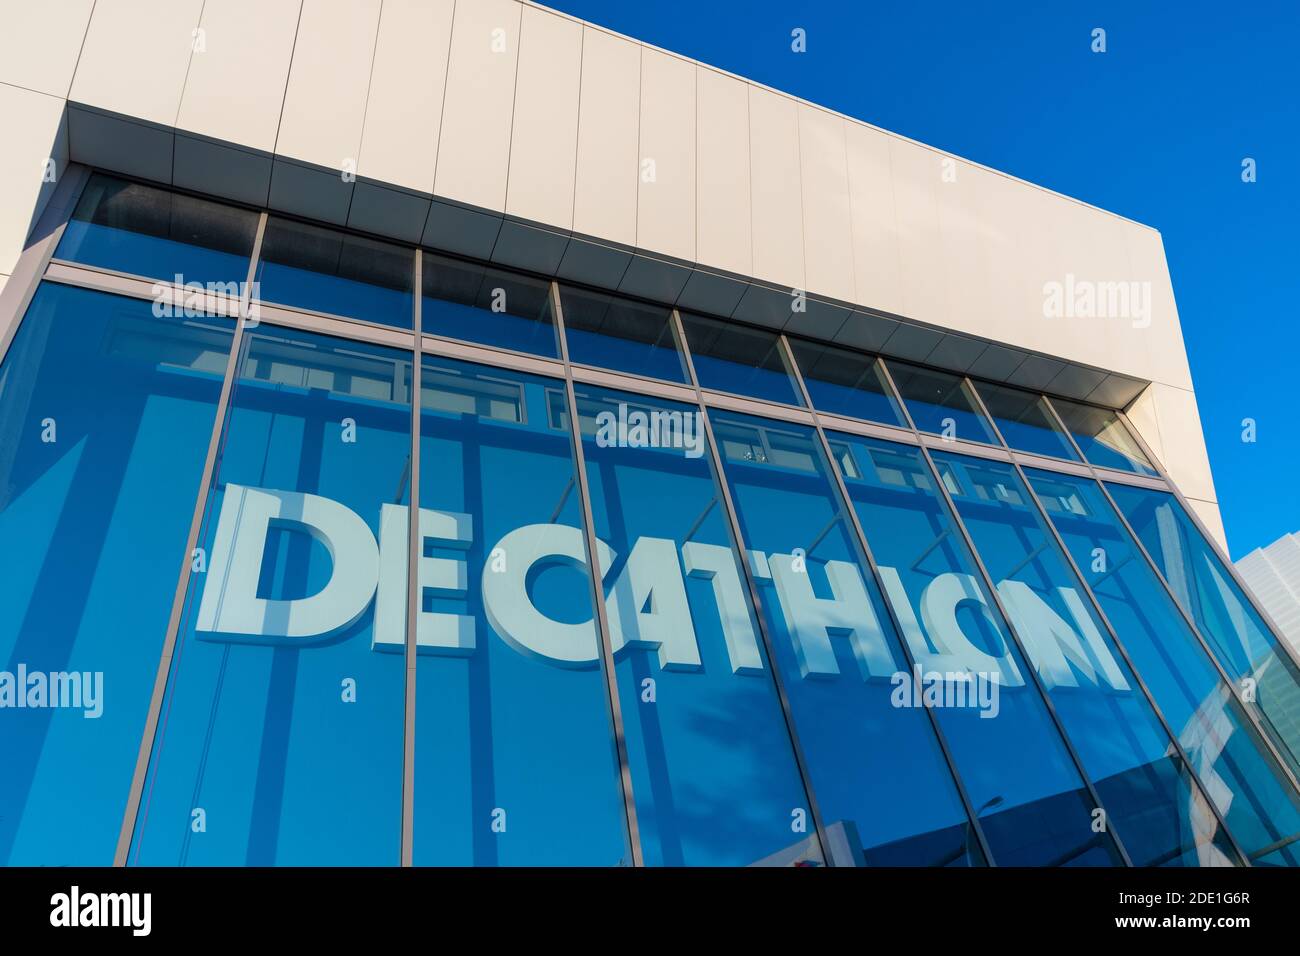 Vélizy-Villacoublay, France - November 27, 2020: Exterior view of a Decathlon store. Decathlon is the world largest sporting good retailer Stock Photo